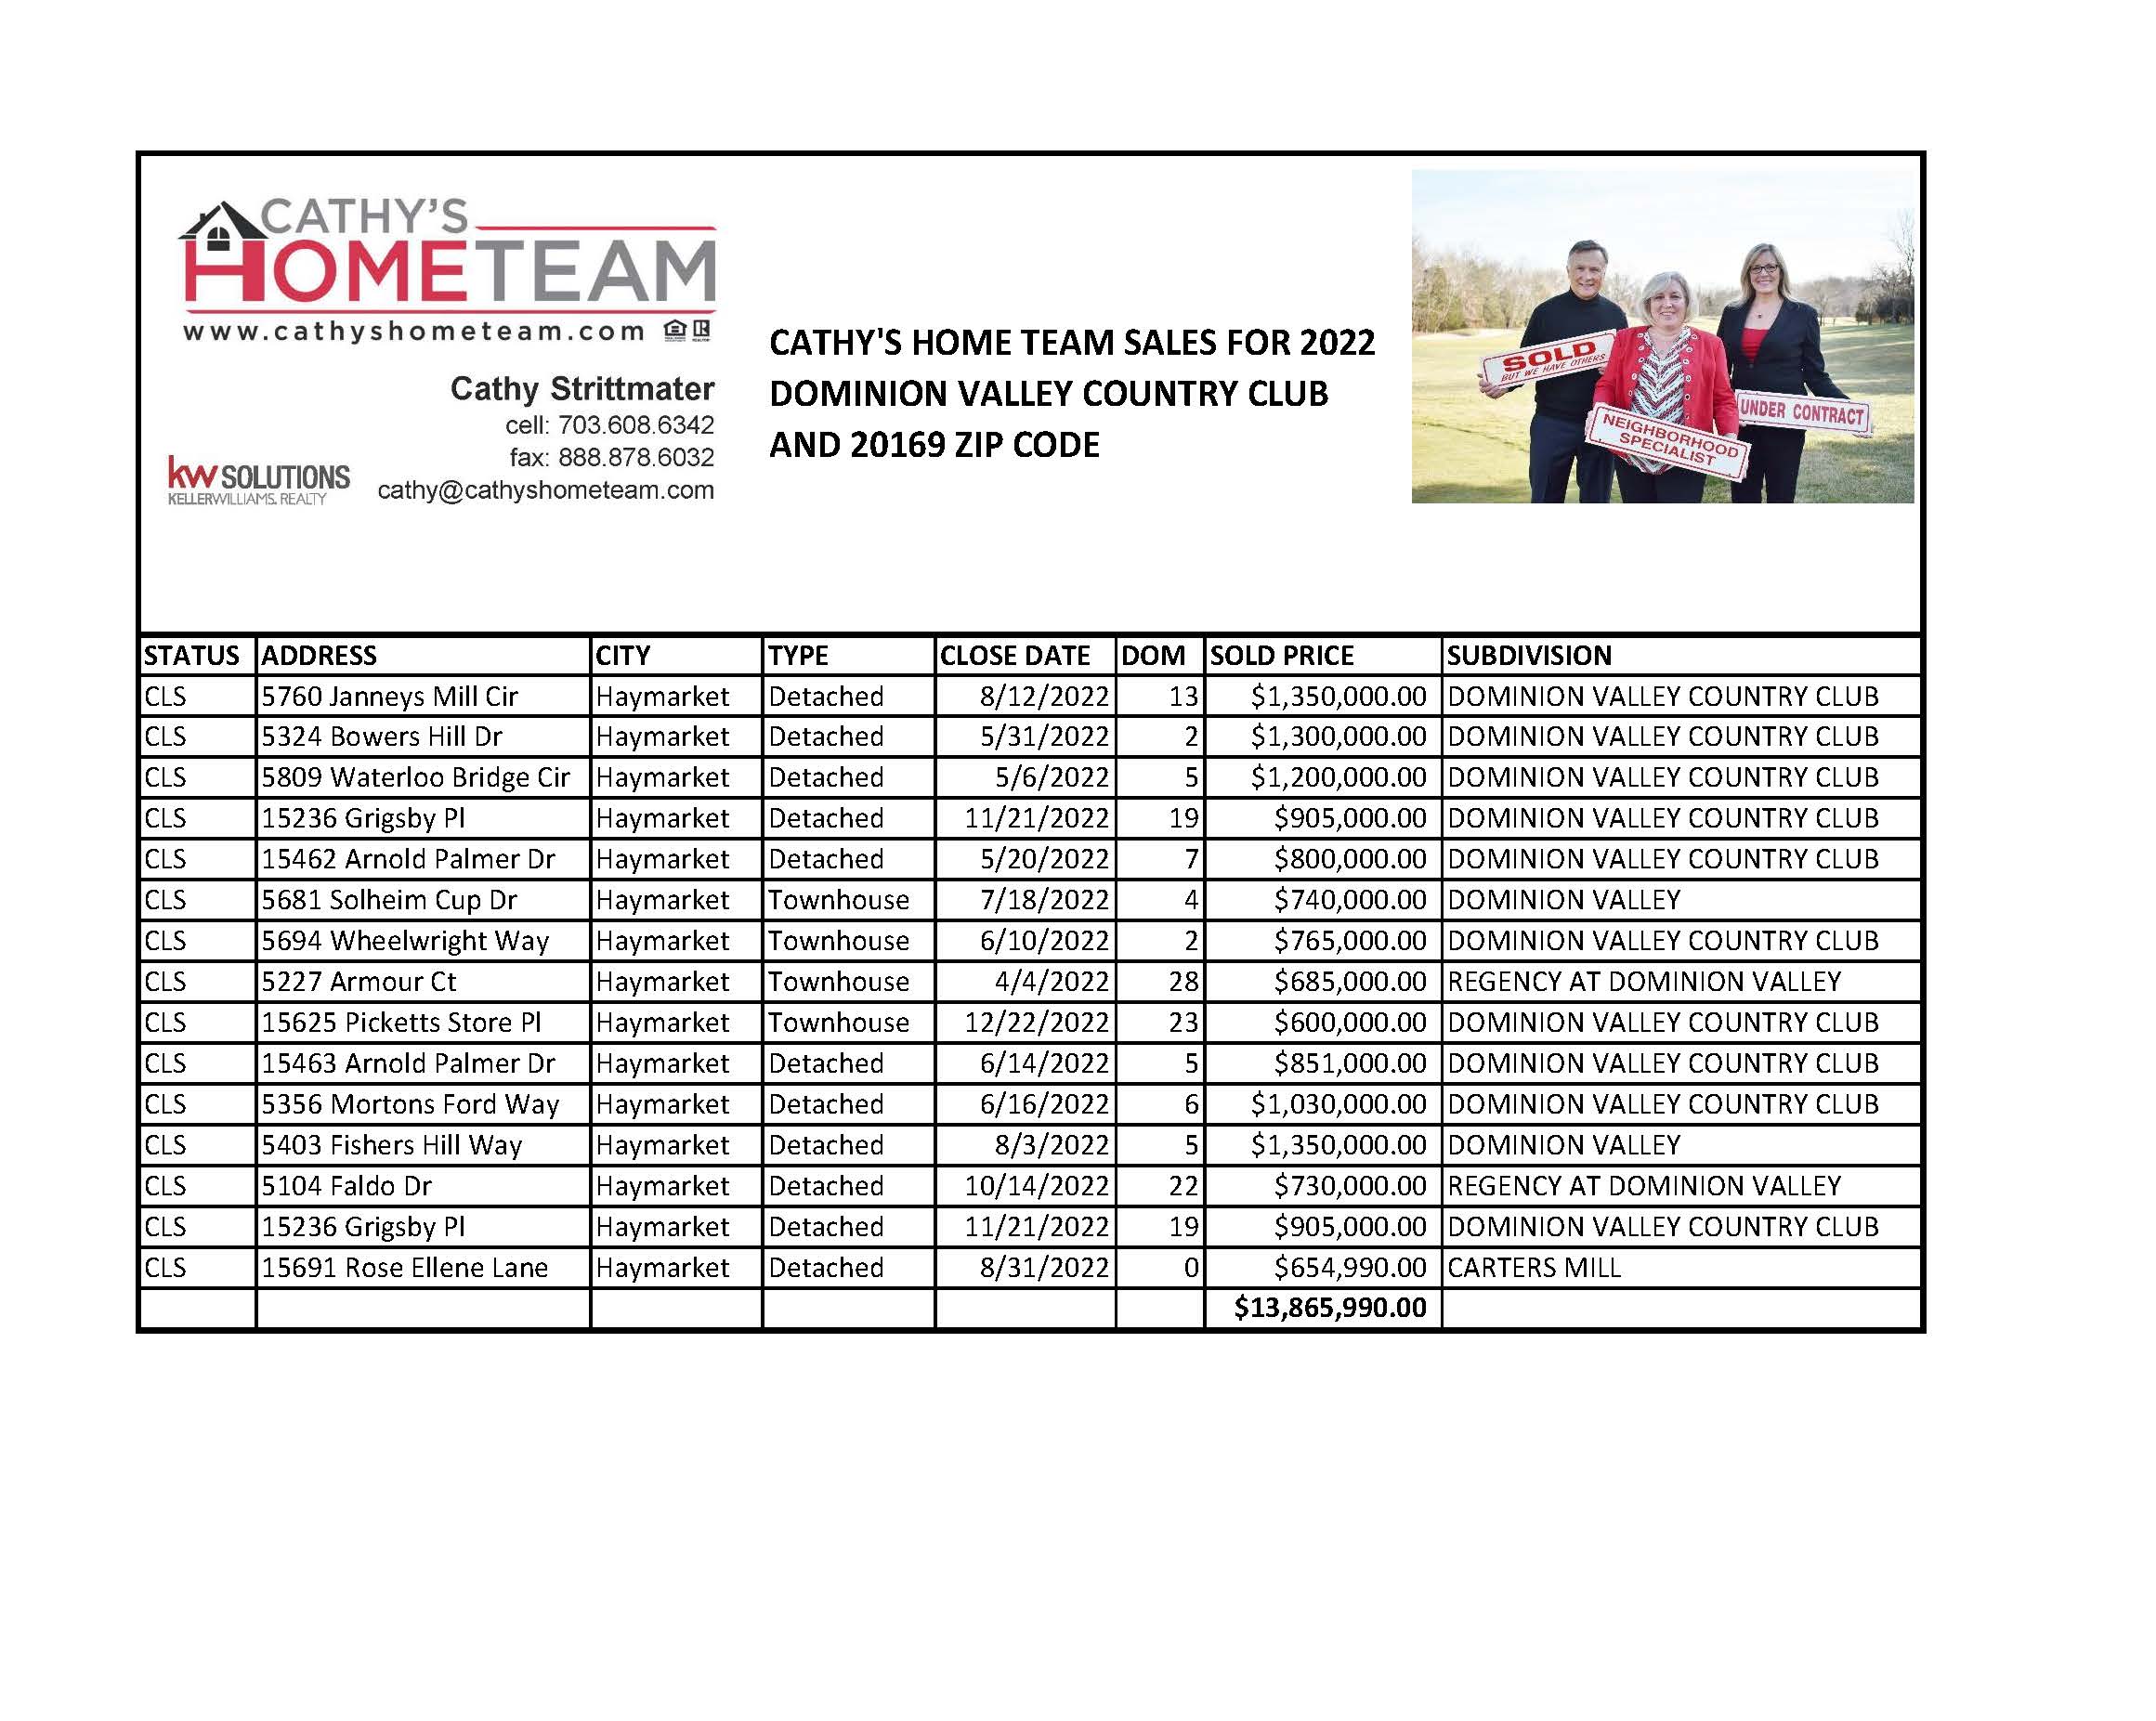 Cathy's Home Team #1 in Haymarket and Dominion Valley in 2022!